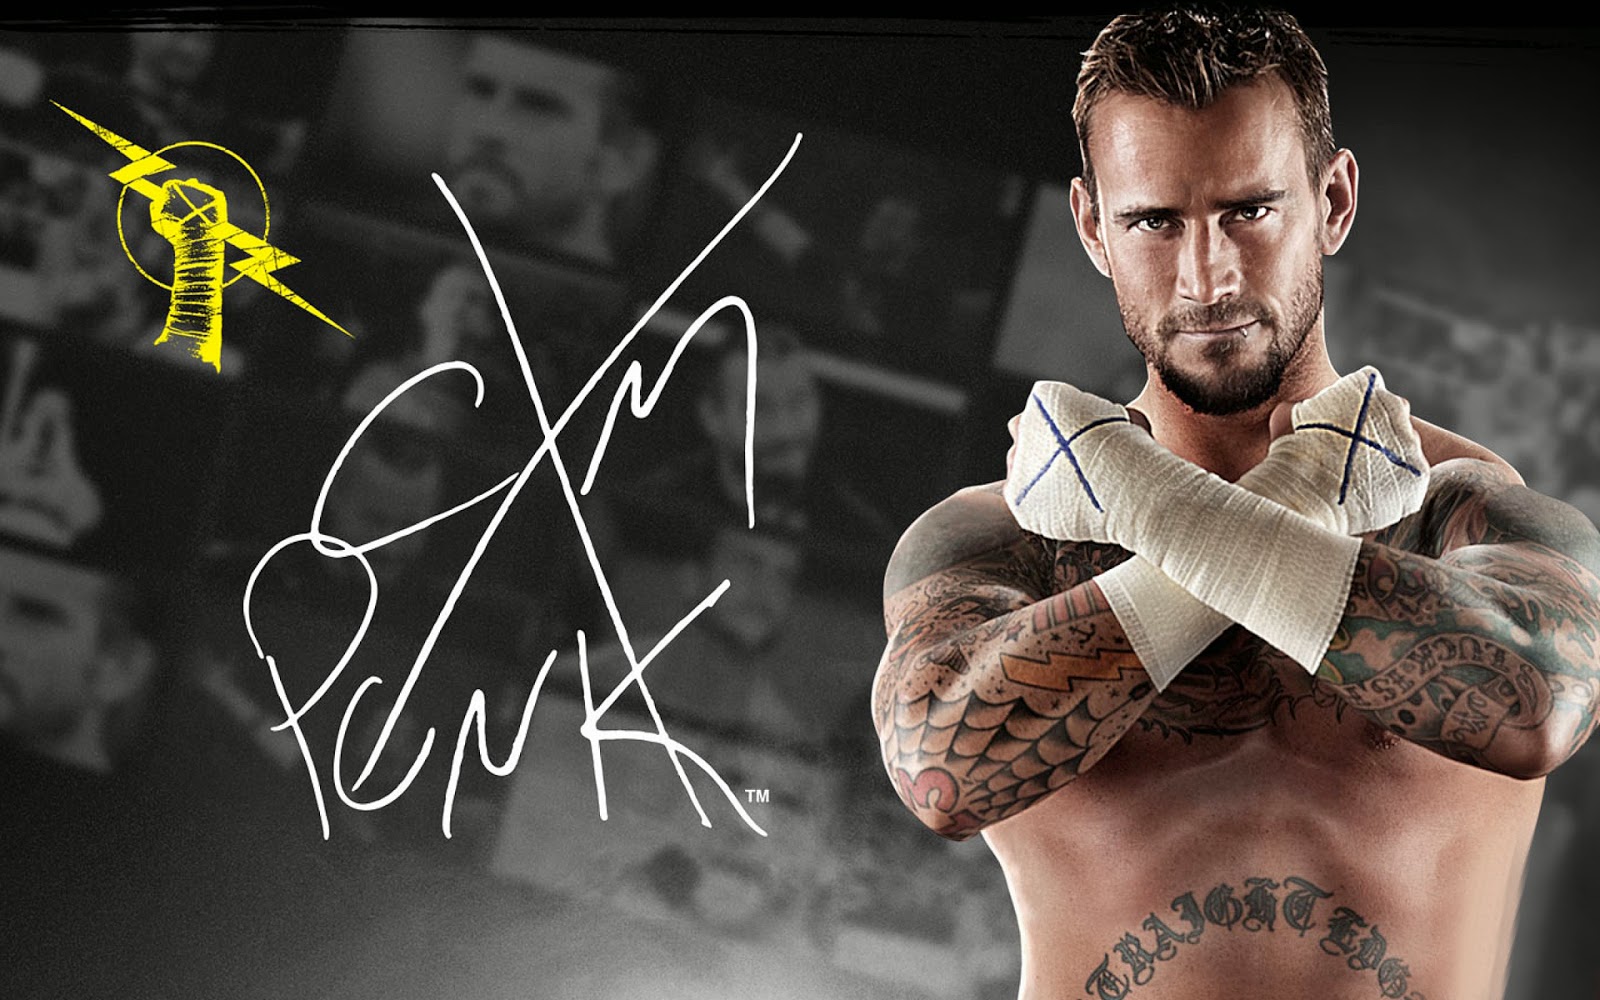 Wwe Superstars And All Wrestlers HD Wallpaper